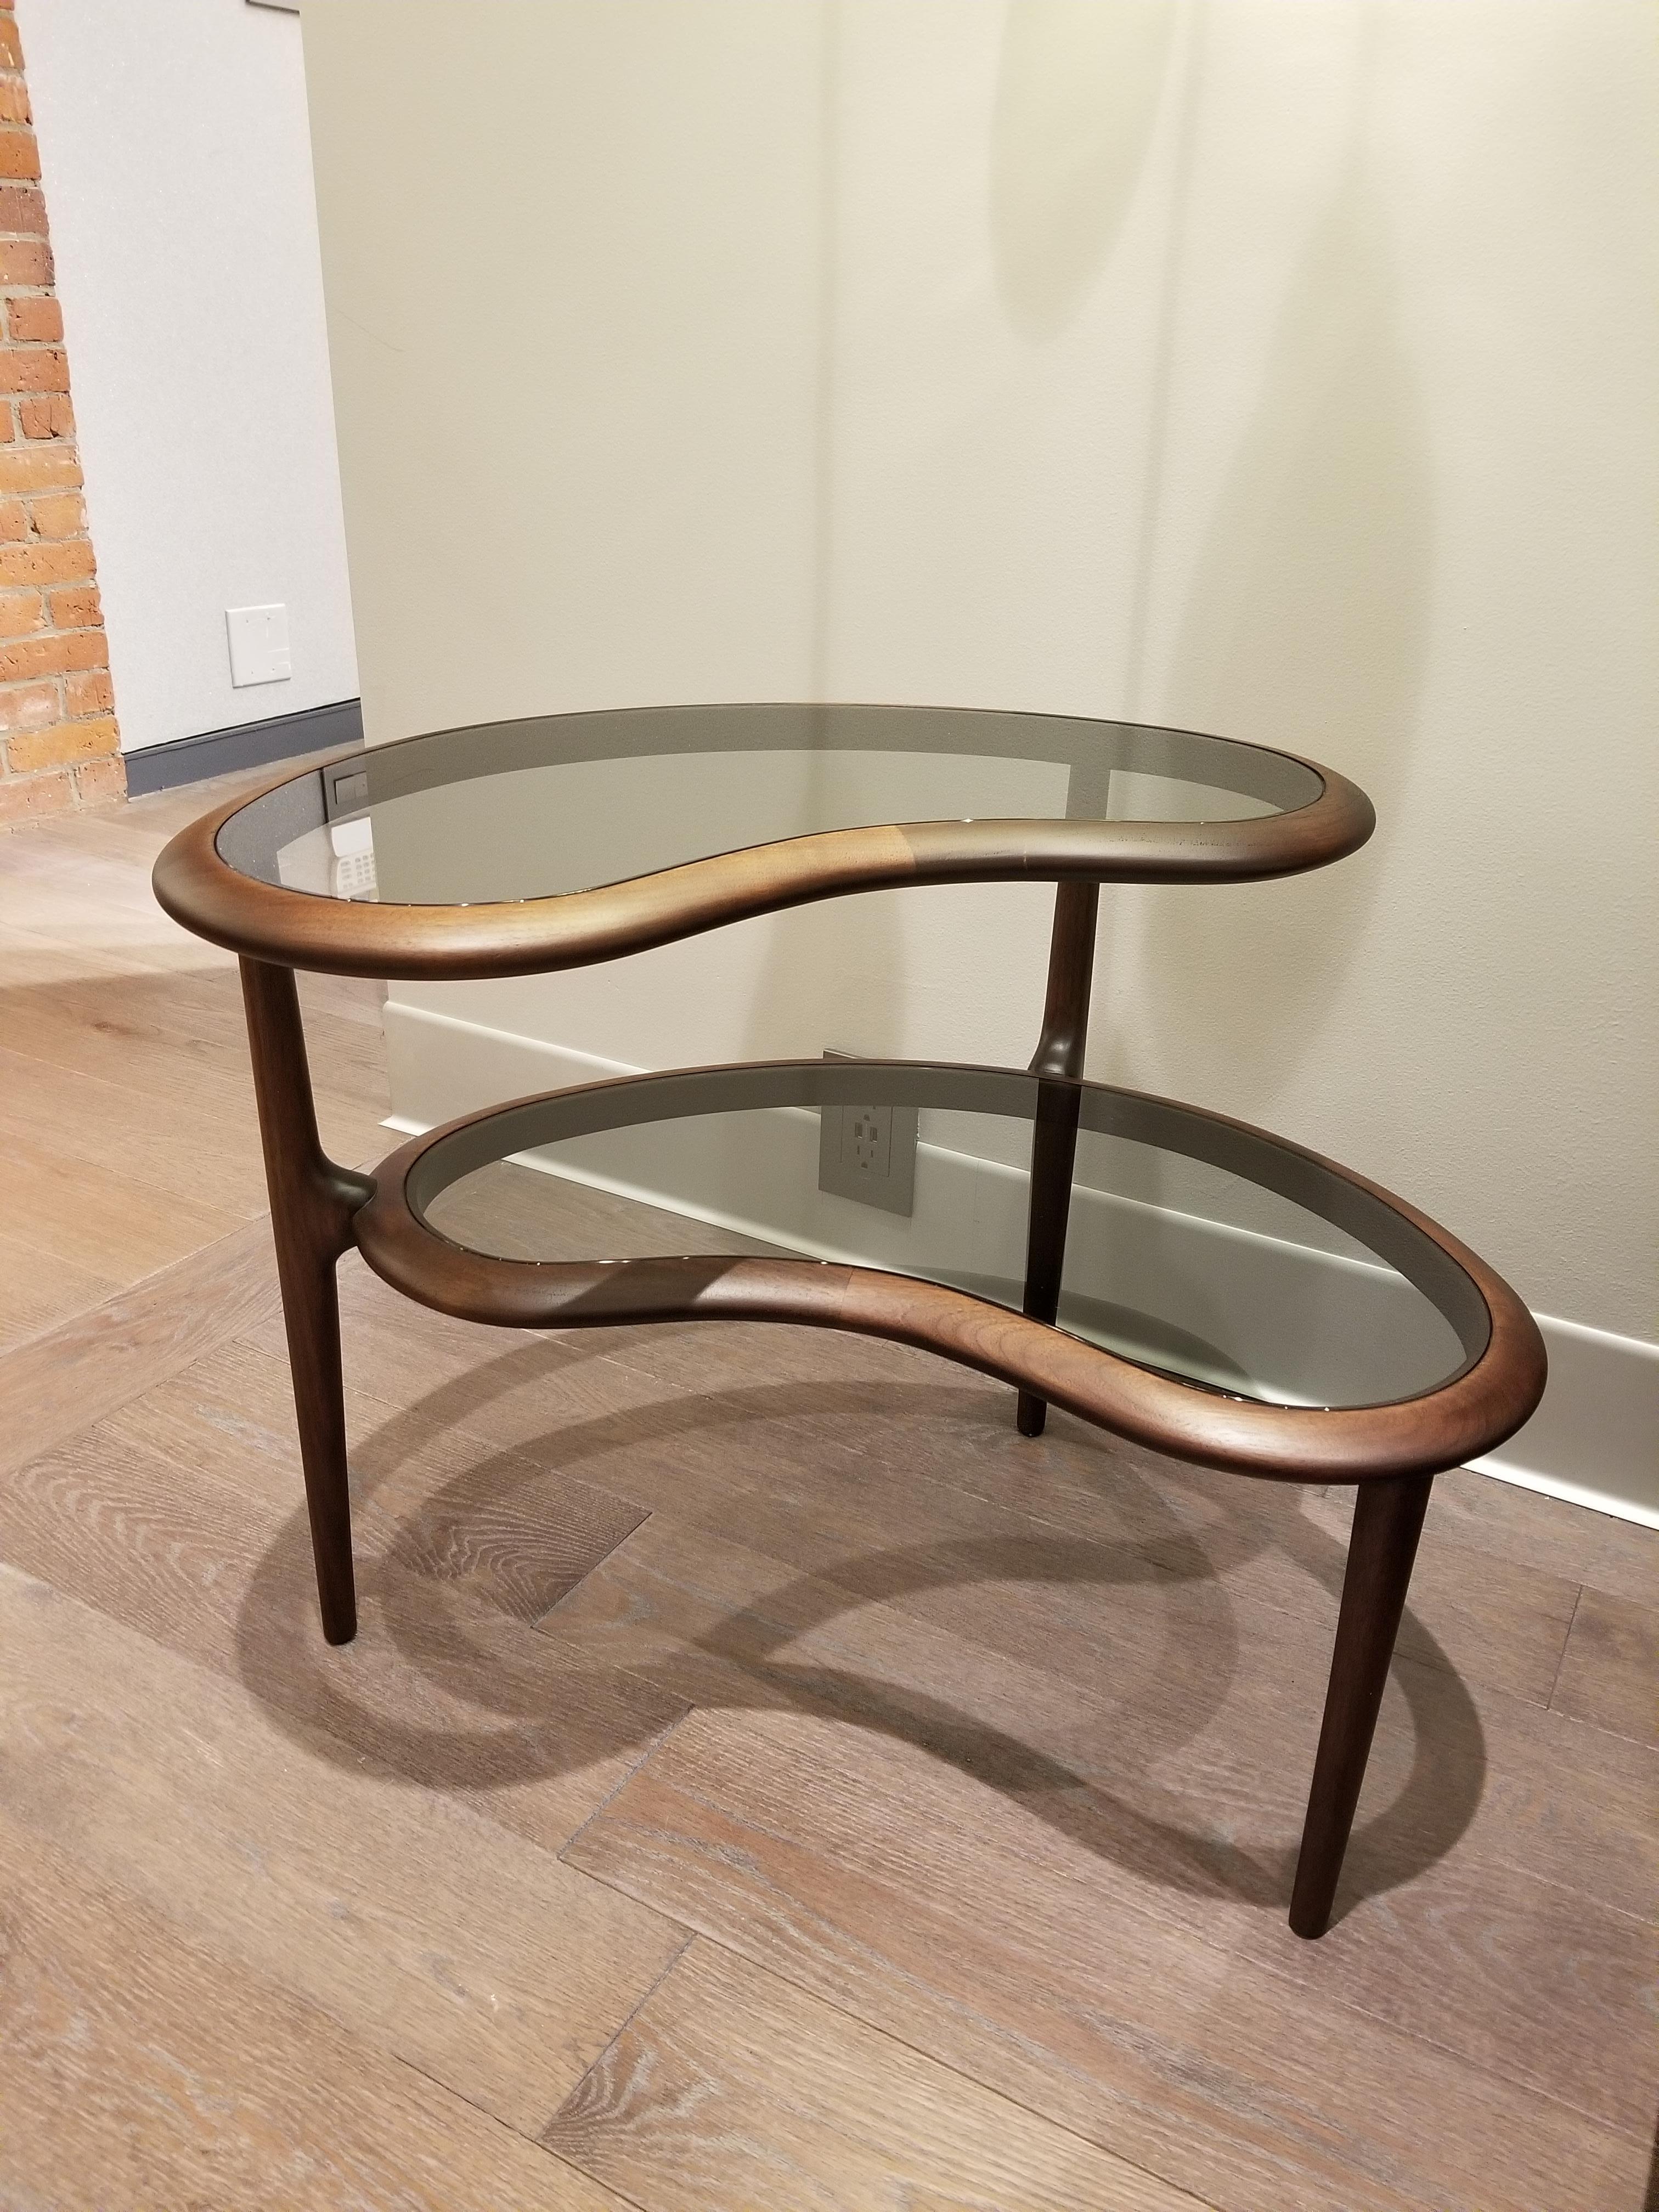 Fagiolo is the coffee table signed by Roberto Lazzeroni for Ceccotti Collections double soul and the organic form inspired by the famous legume whose name it bears.

Table left handmade in solid dark american walnut, double top in smoked